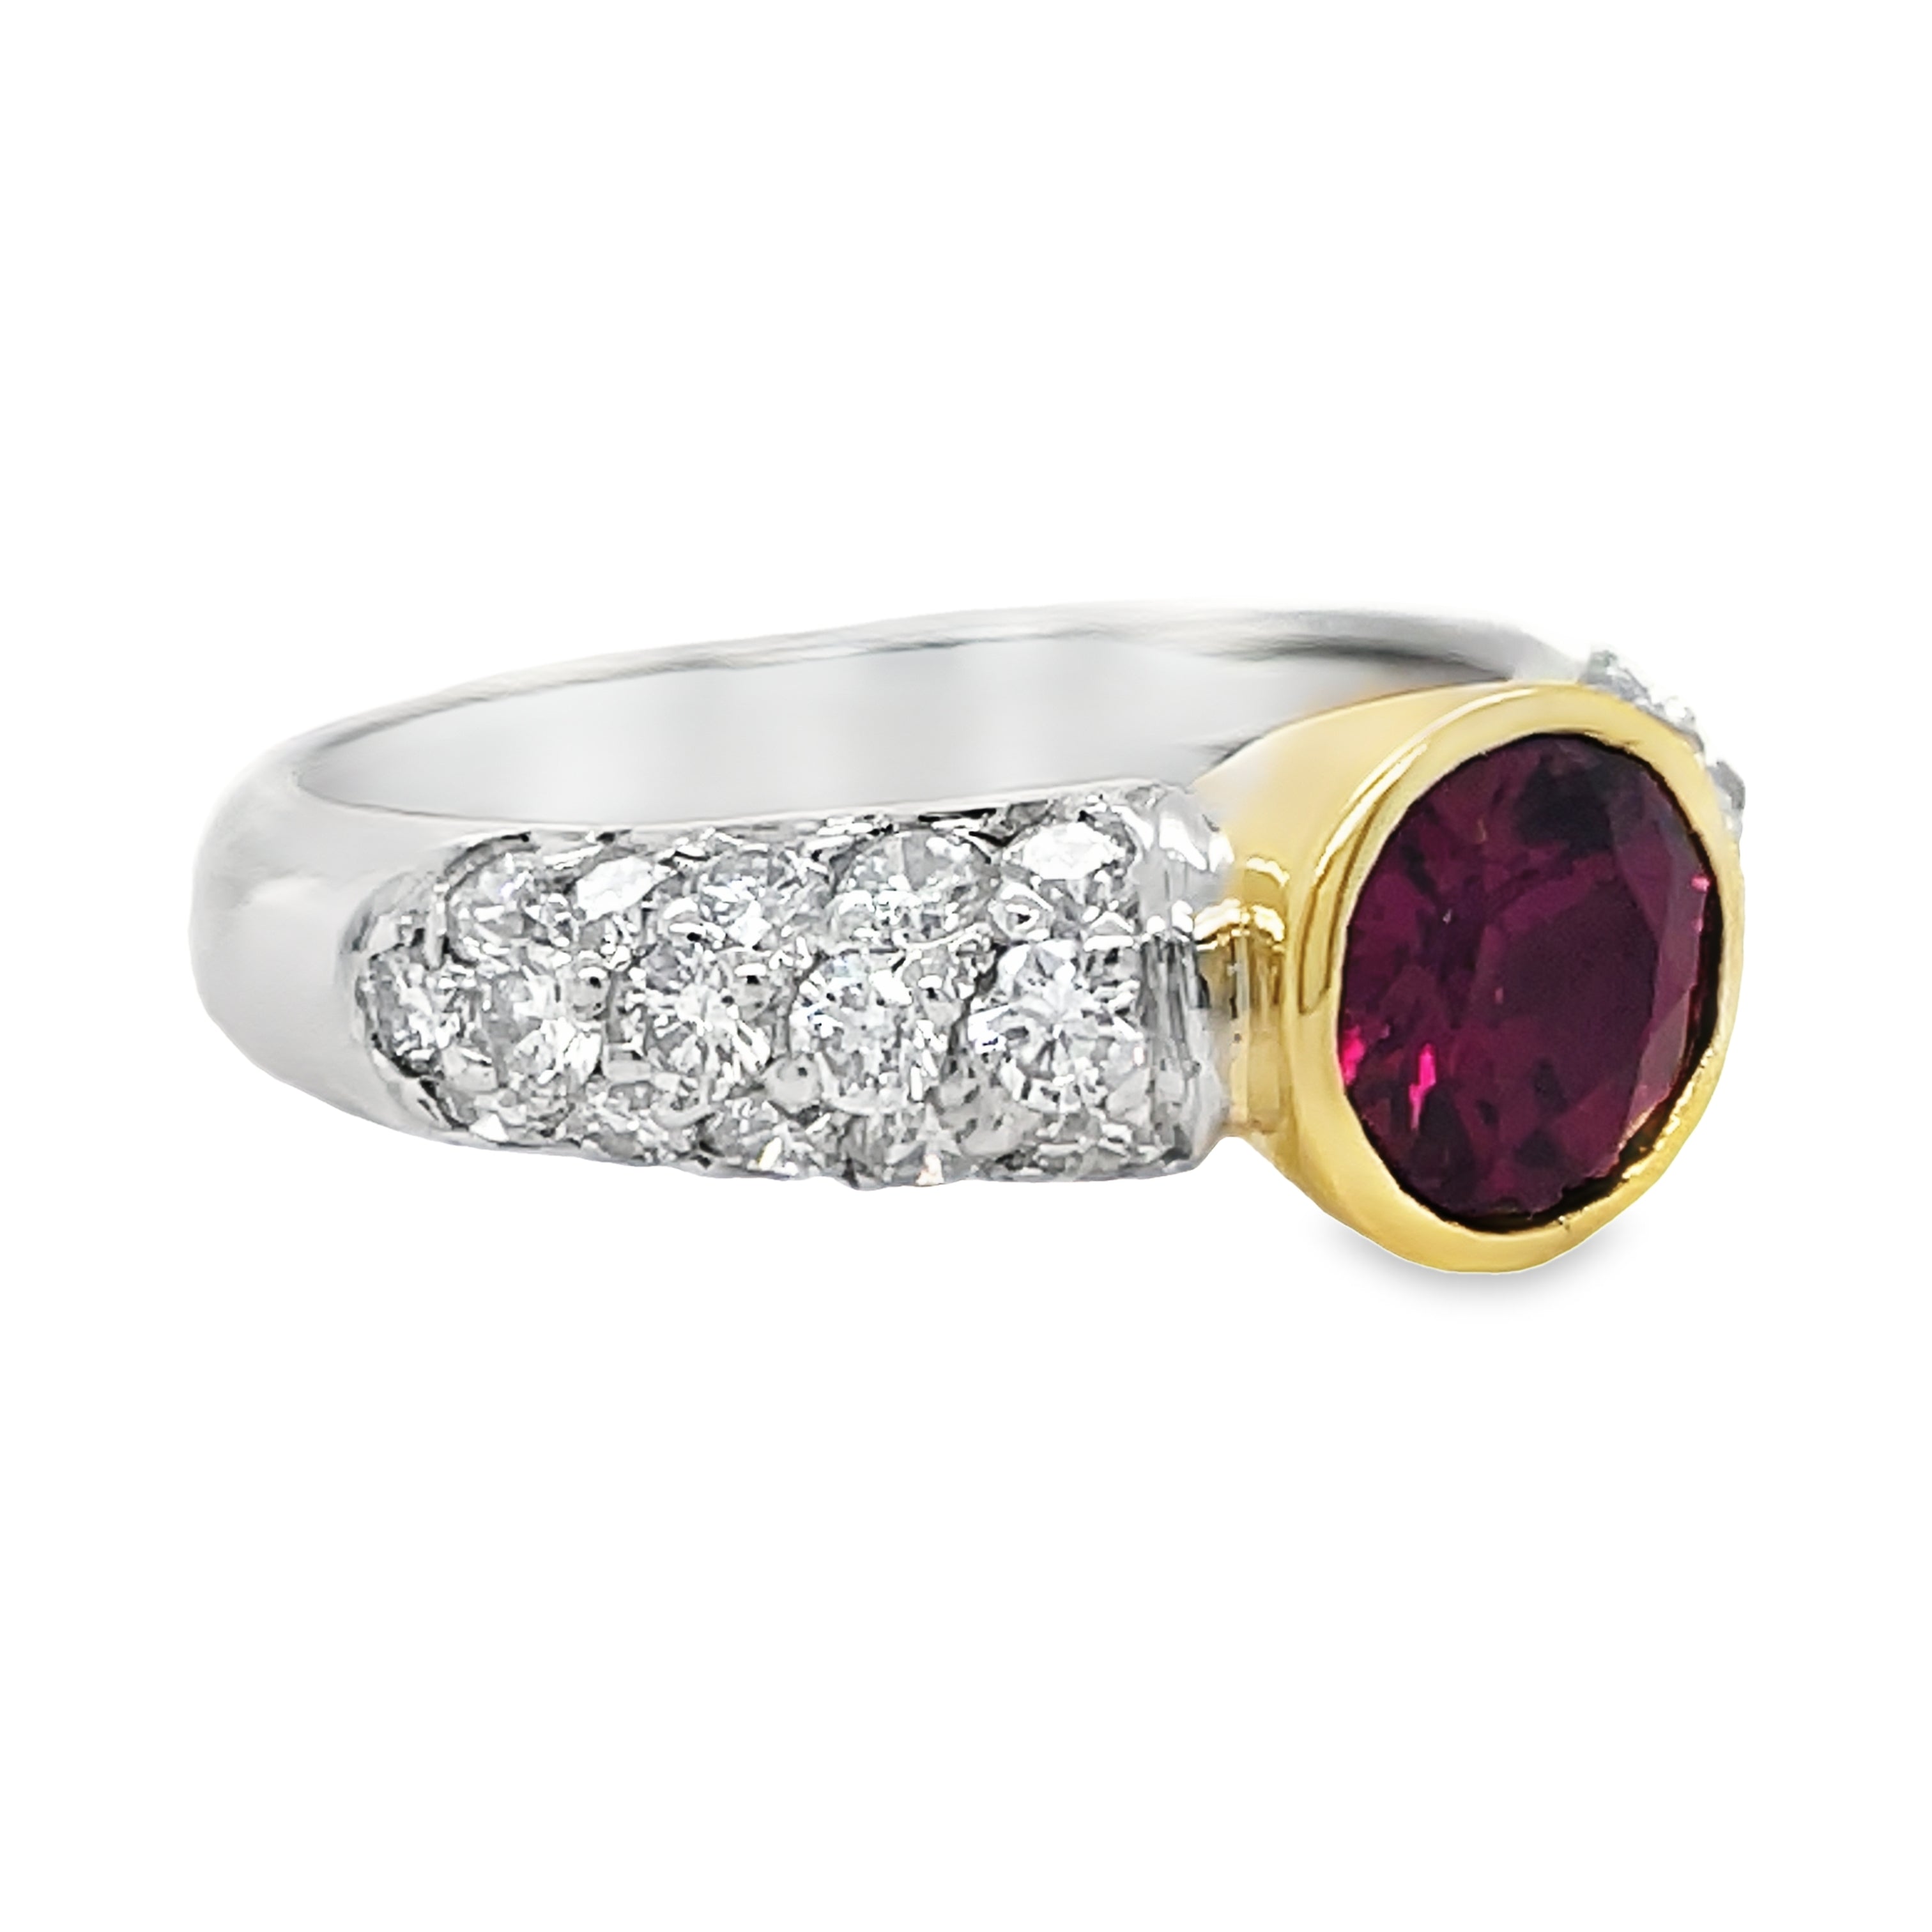 This exquisite Two-Tone Rhodolite Diamond Ring features a vibrant rhodolite stone bezel set in 18k two tone gold, accented with round diamonds totaling 1.05 carats. Elevate your style with this unique and stunning piece.